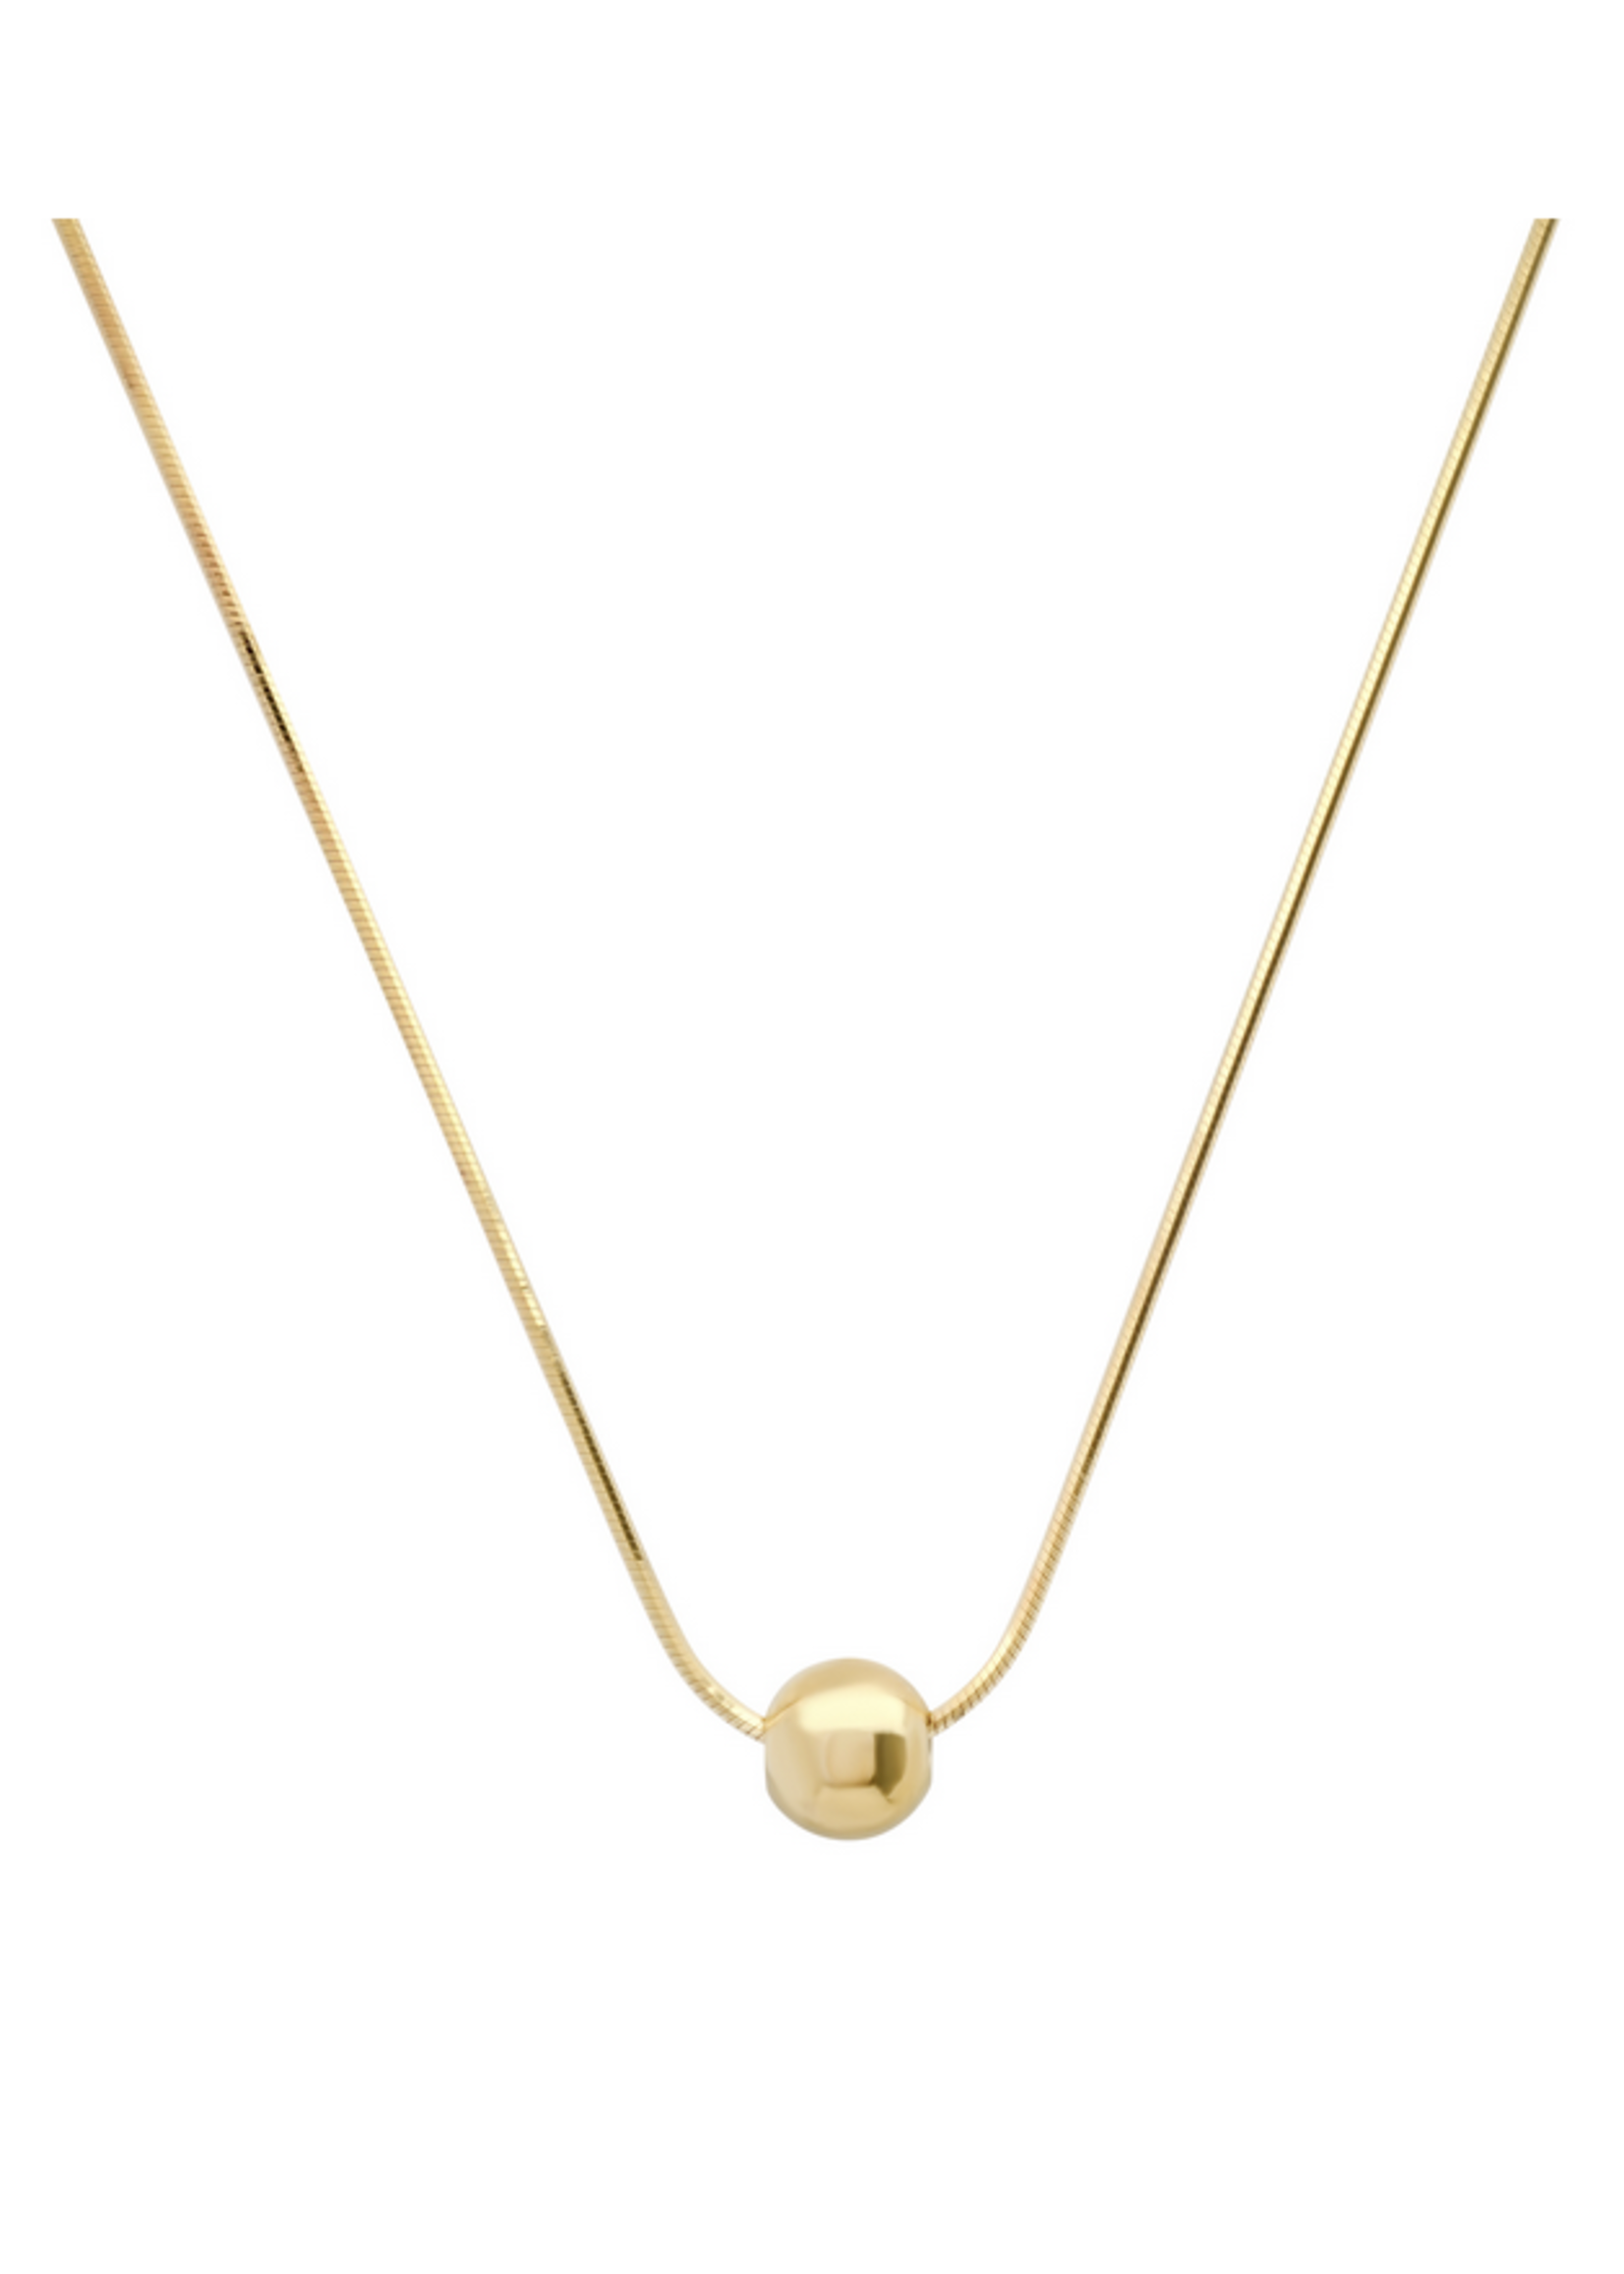 Tai gold ball charm necklace